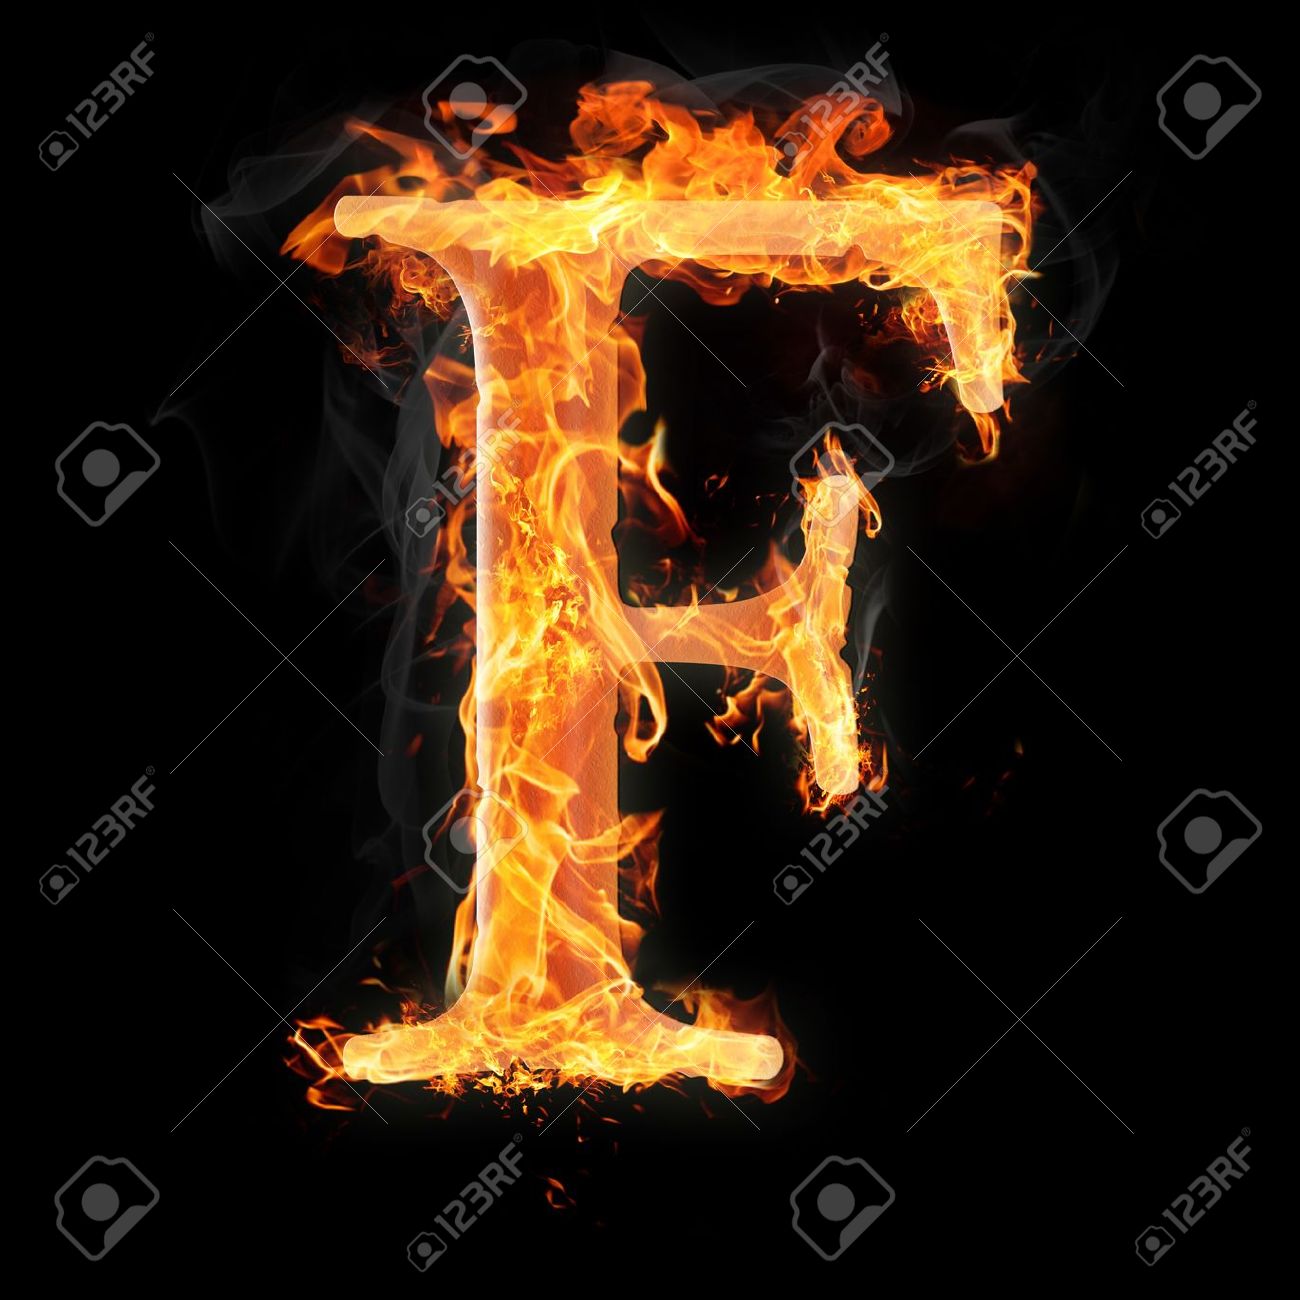 22046029-letters-and-symbols-in-fire-letter-f-.jpg